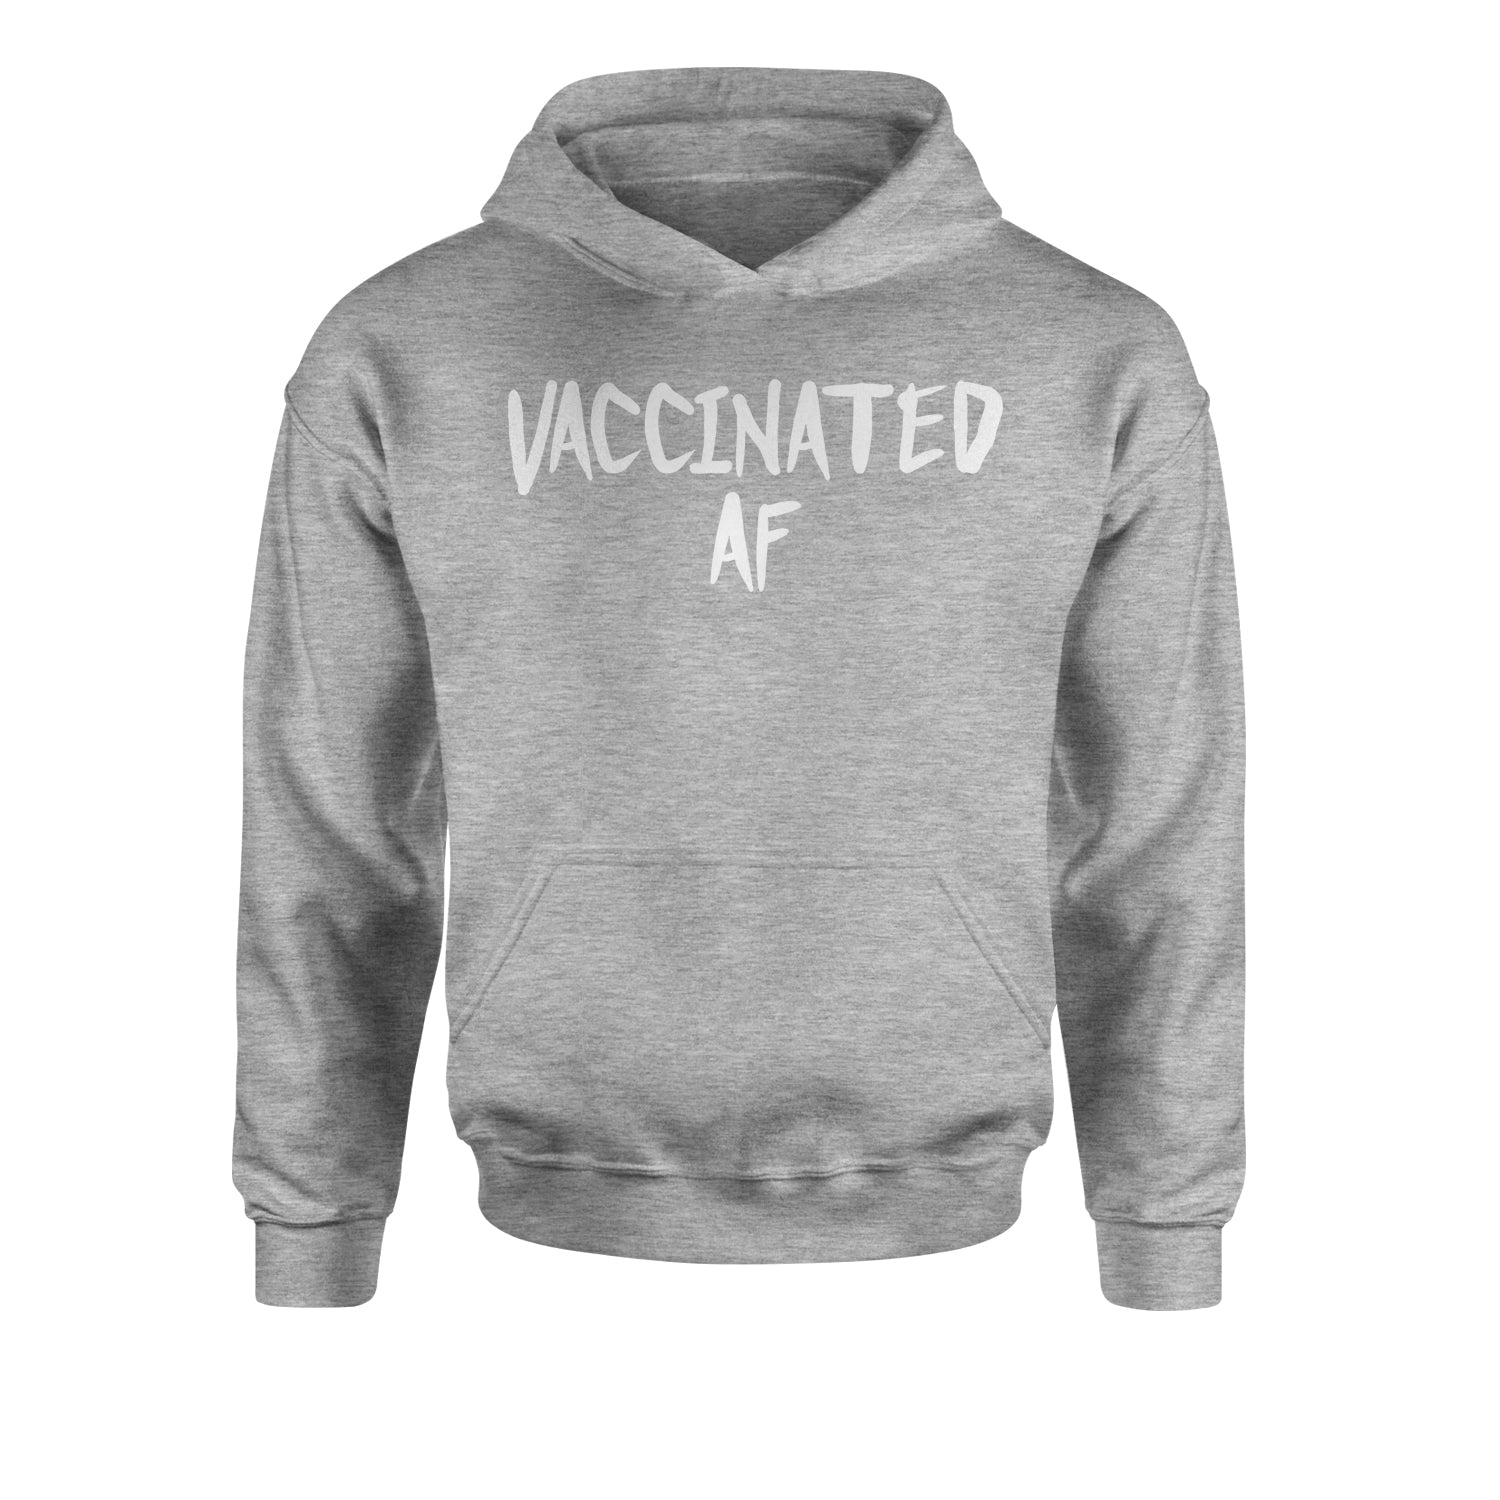 Vaccinated AF Pro Vaccine Funny Vaccination Health Youth-Sized Hoodie moderna, pfizer, vaccine, vax, vaxx by Expression Tees